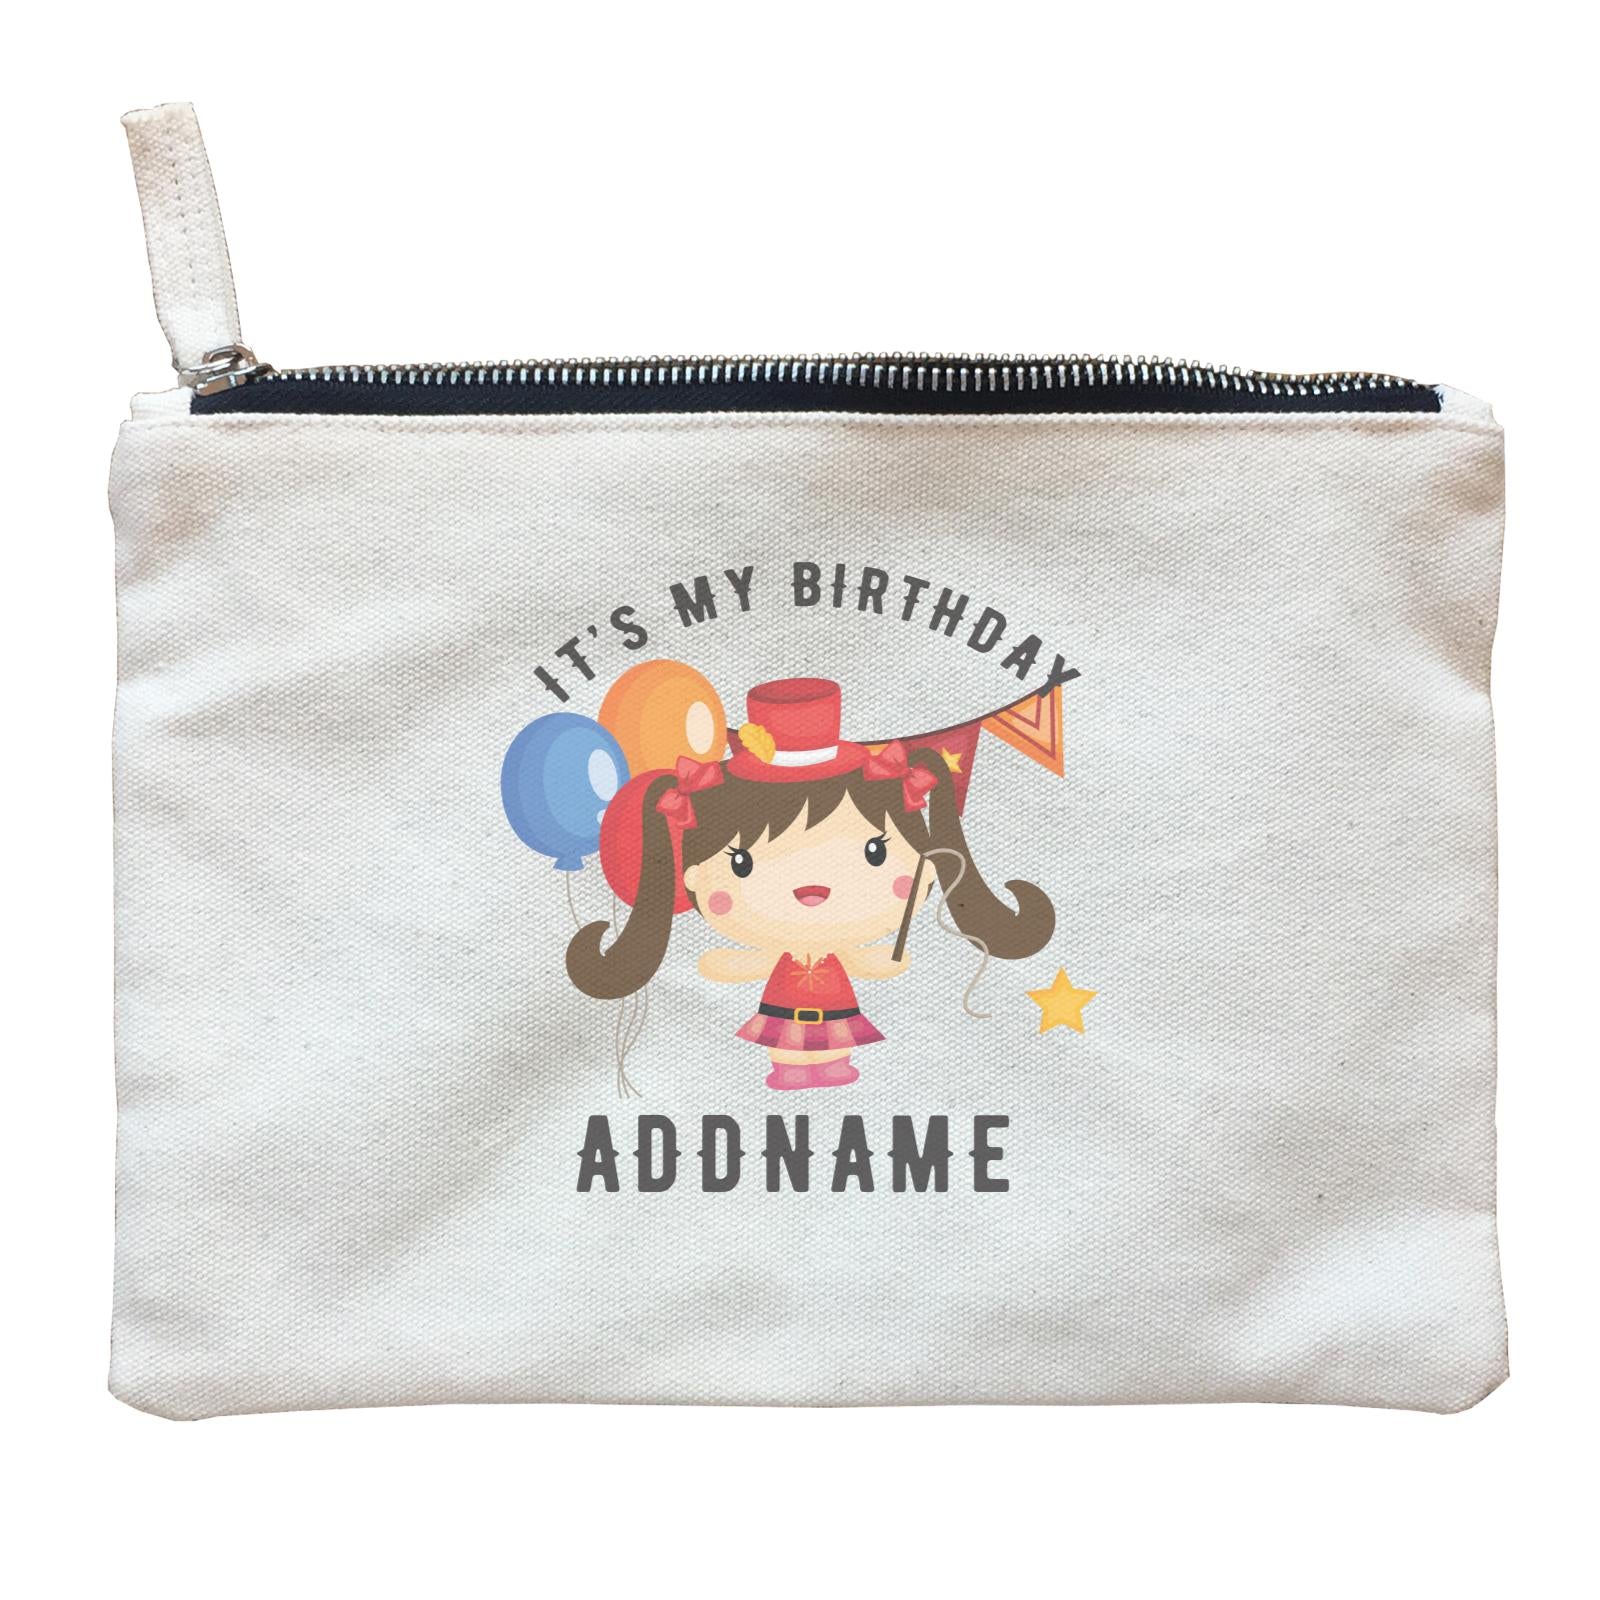 Birthday Circus Happy Girl Leader of Performance It's My Birthday Addname Zipper Pouch